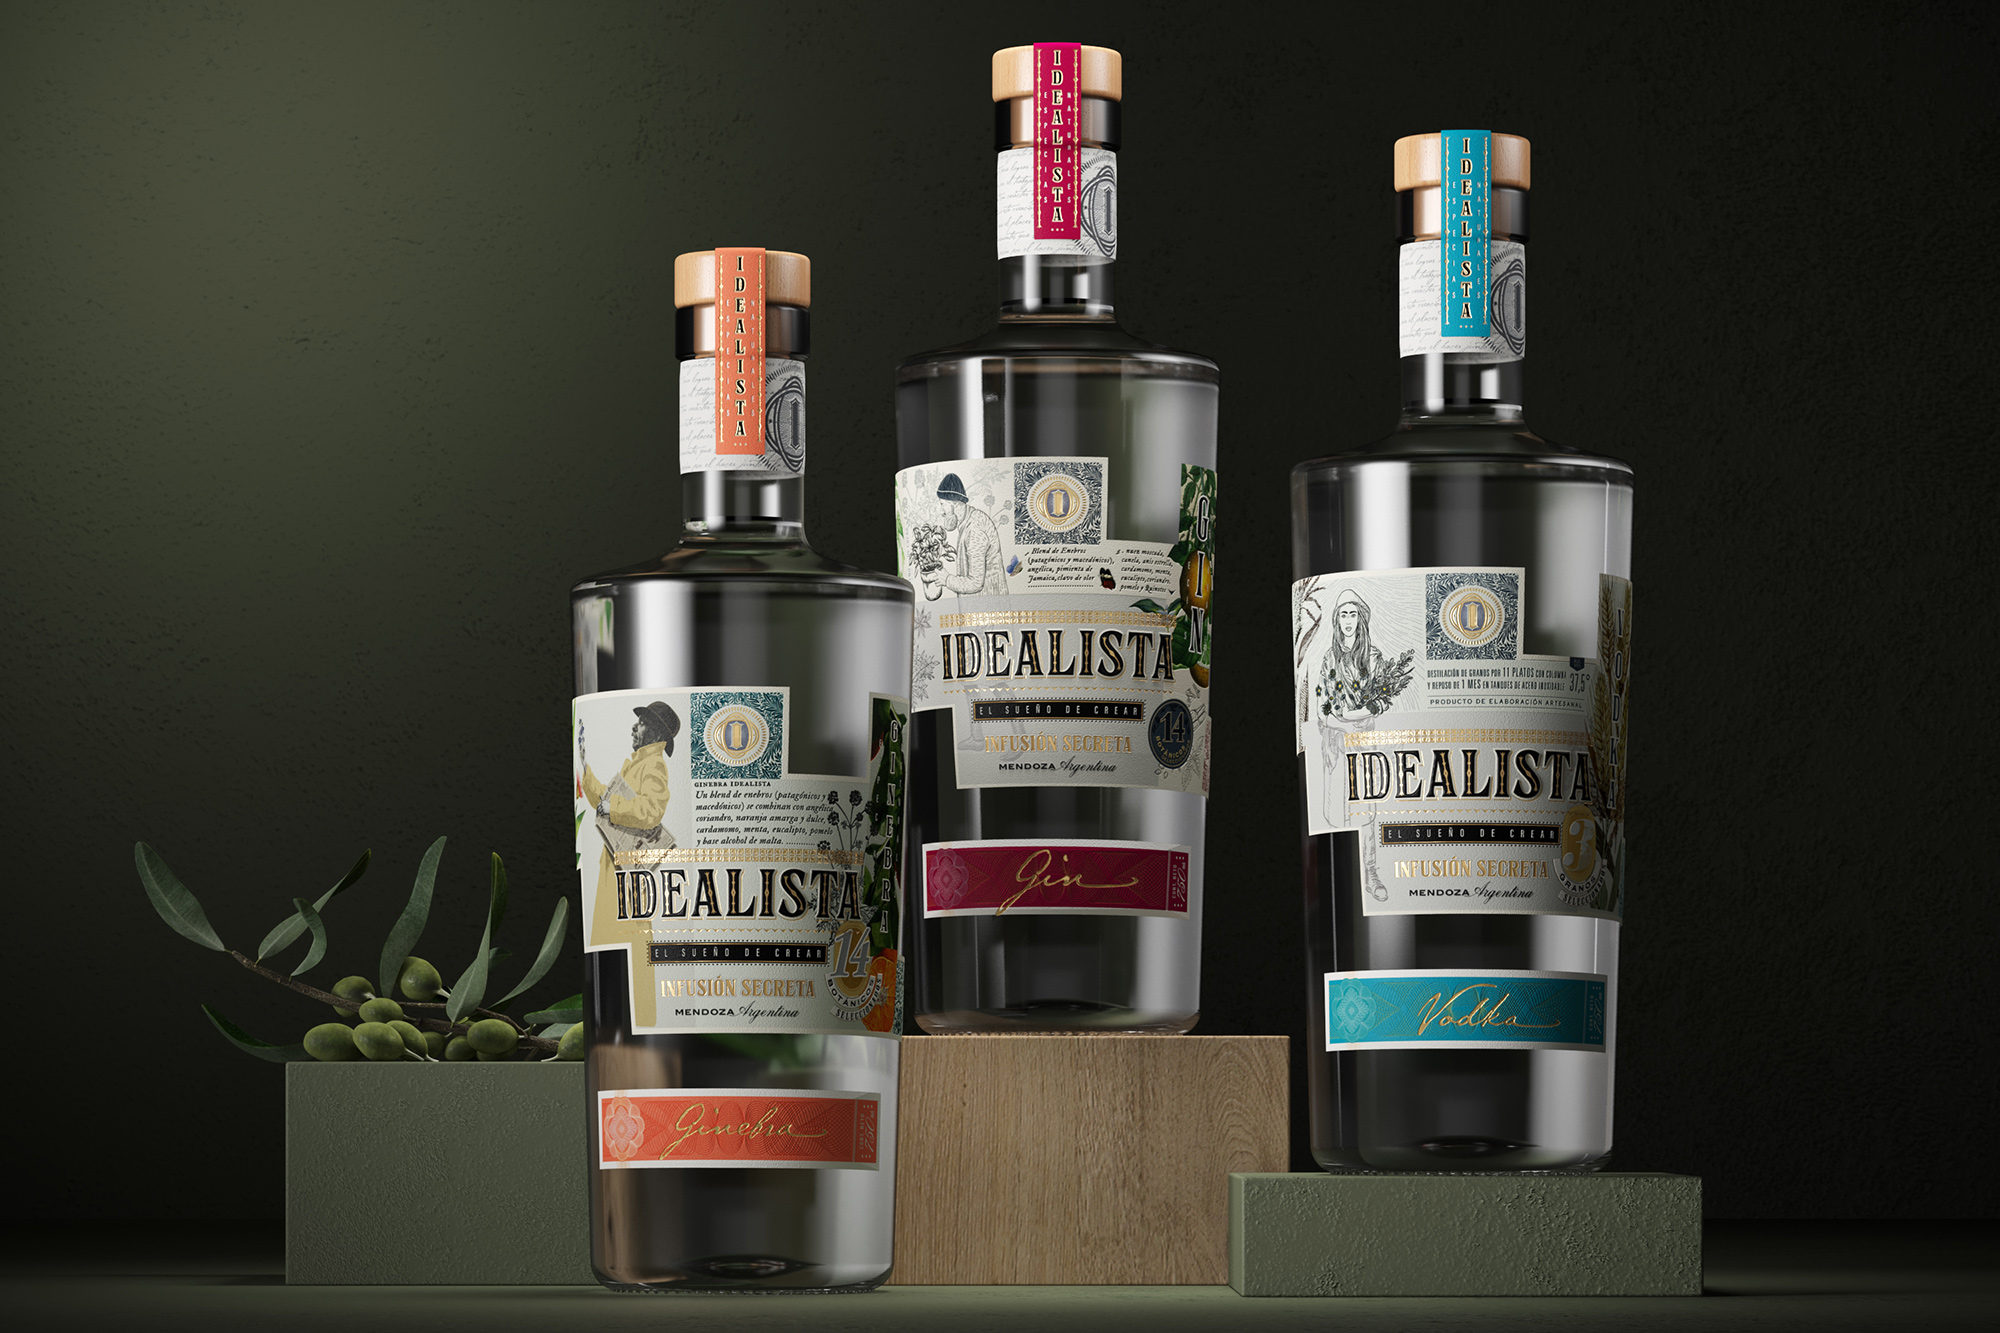 Idealista Innovative Label Design Inspired by Science and Creativity